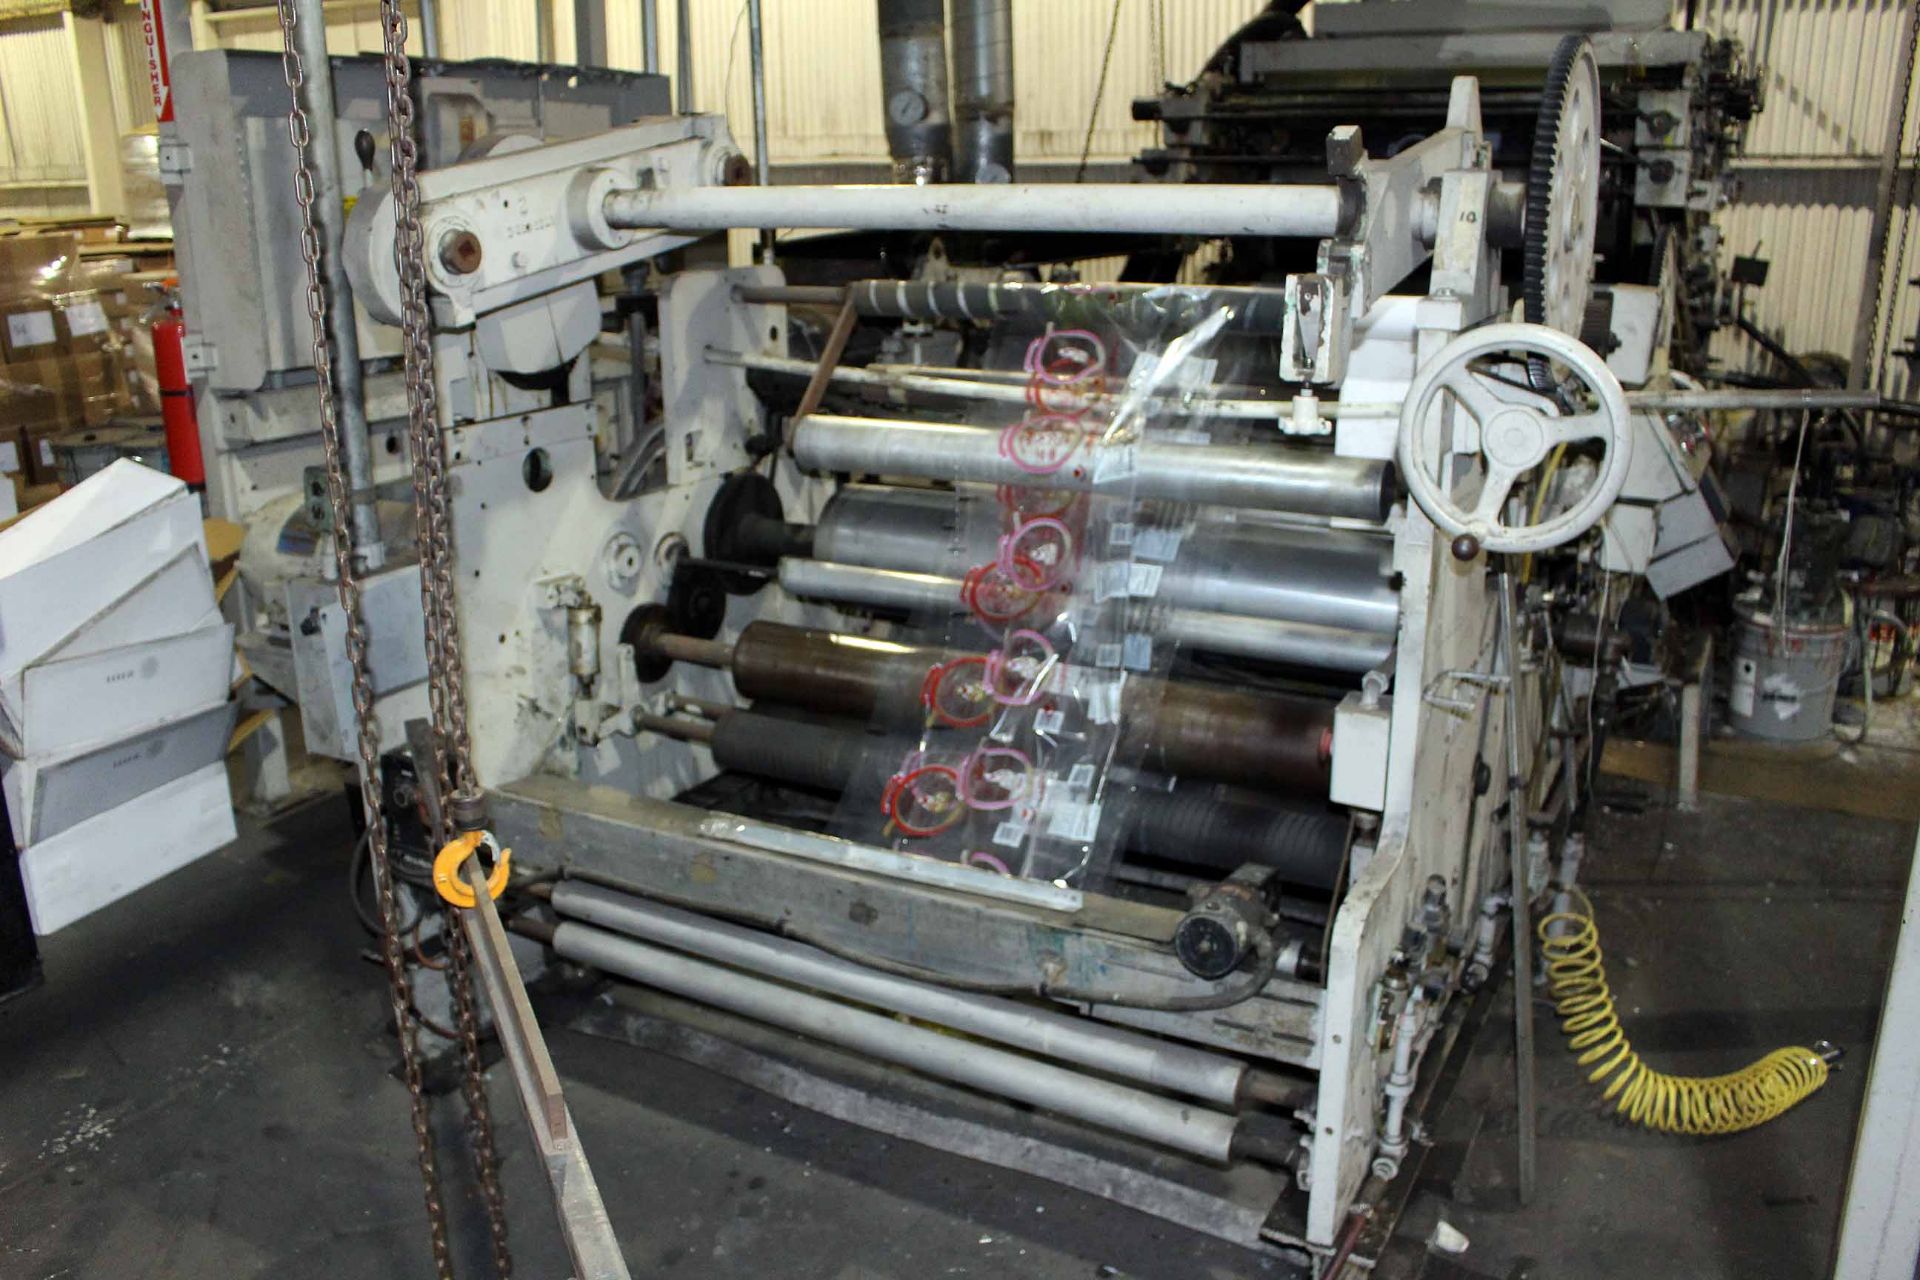 CI FLEXOGRAPHIC PRINTING PRESS, FAUSTEL MDL. E41-II, 44"W. cap., 4-color, fume exhaust blower - Image 4 of 7